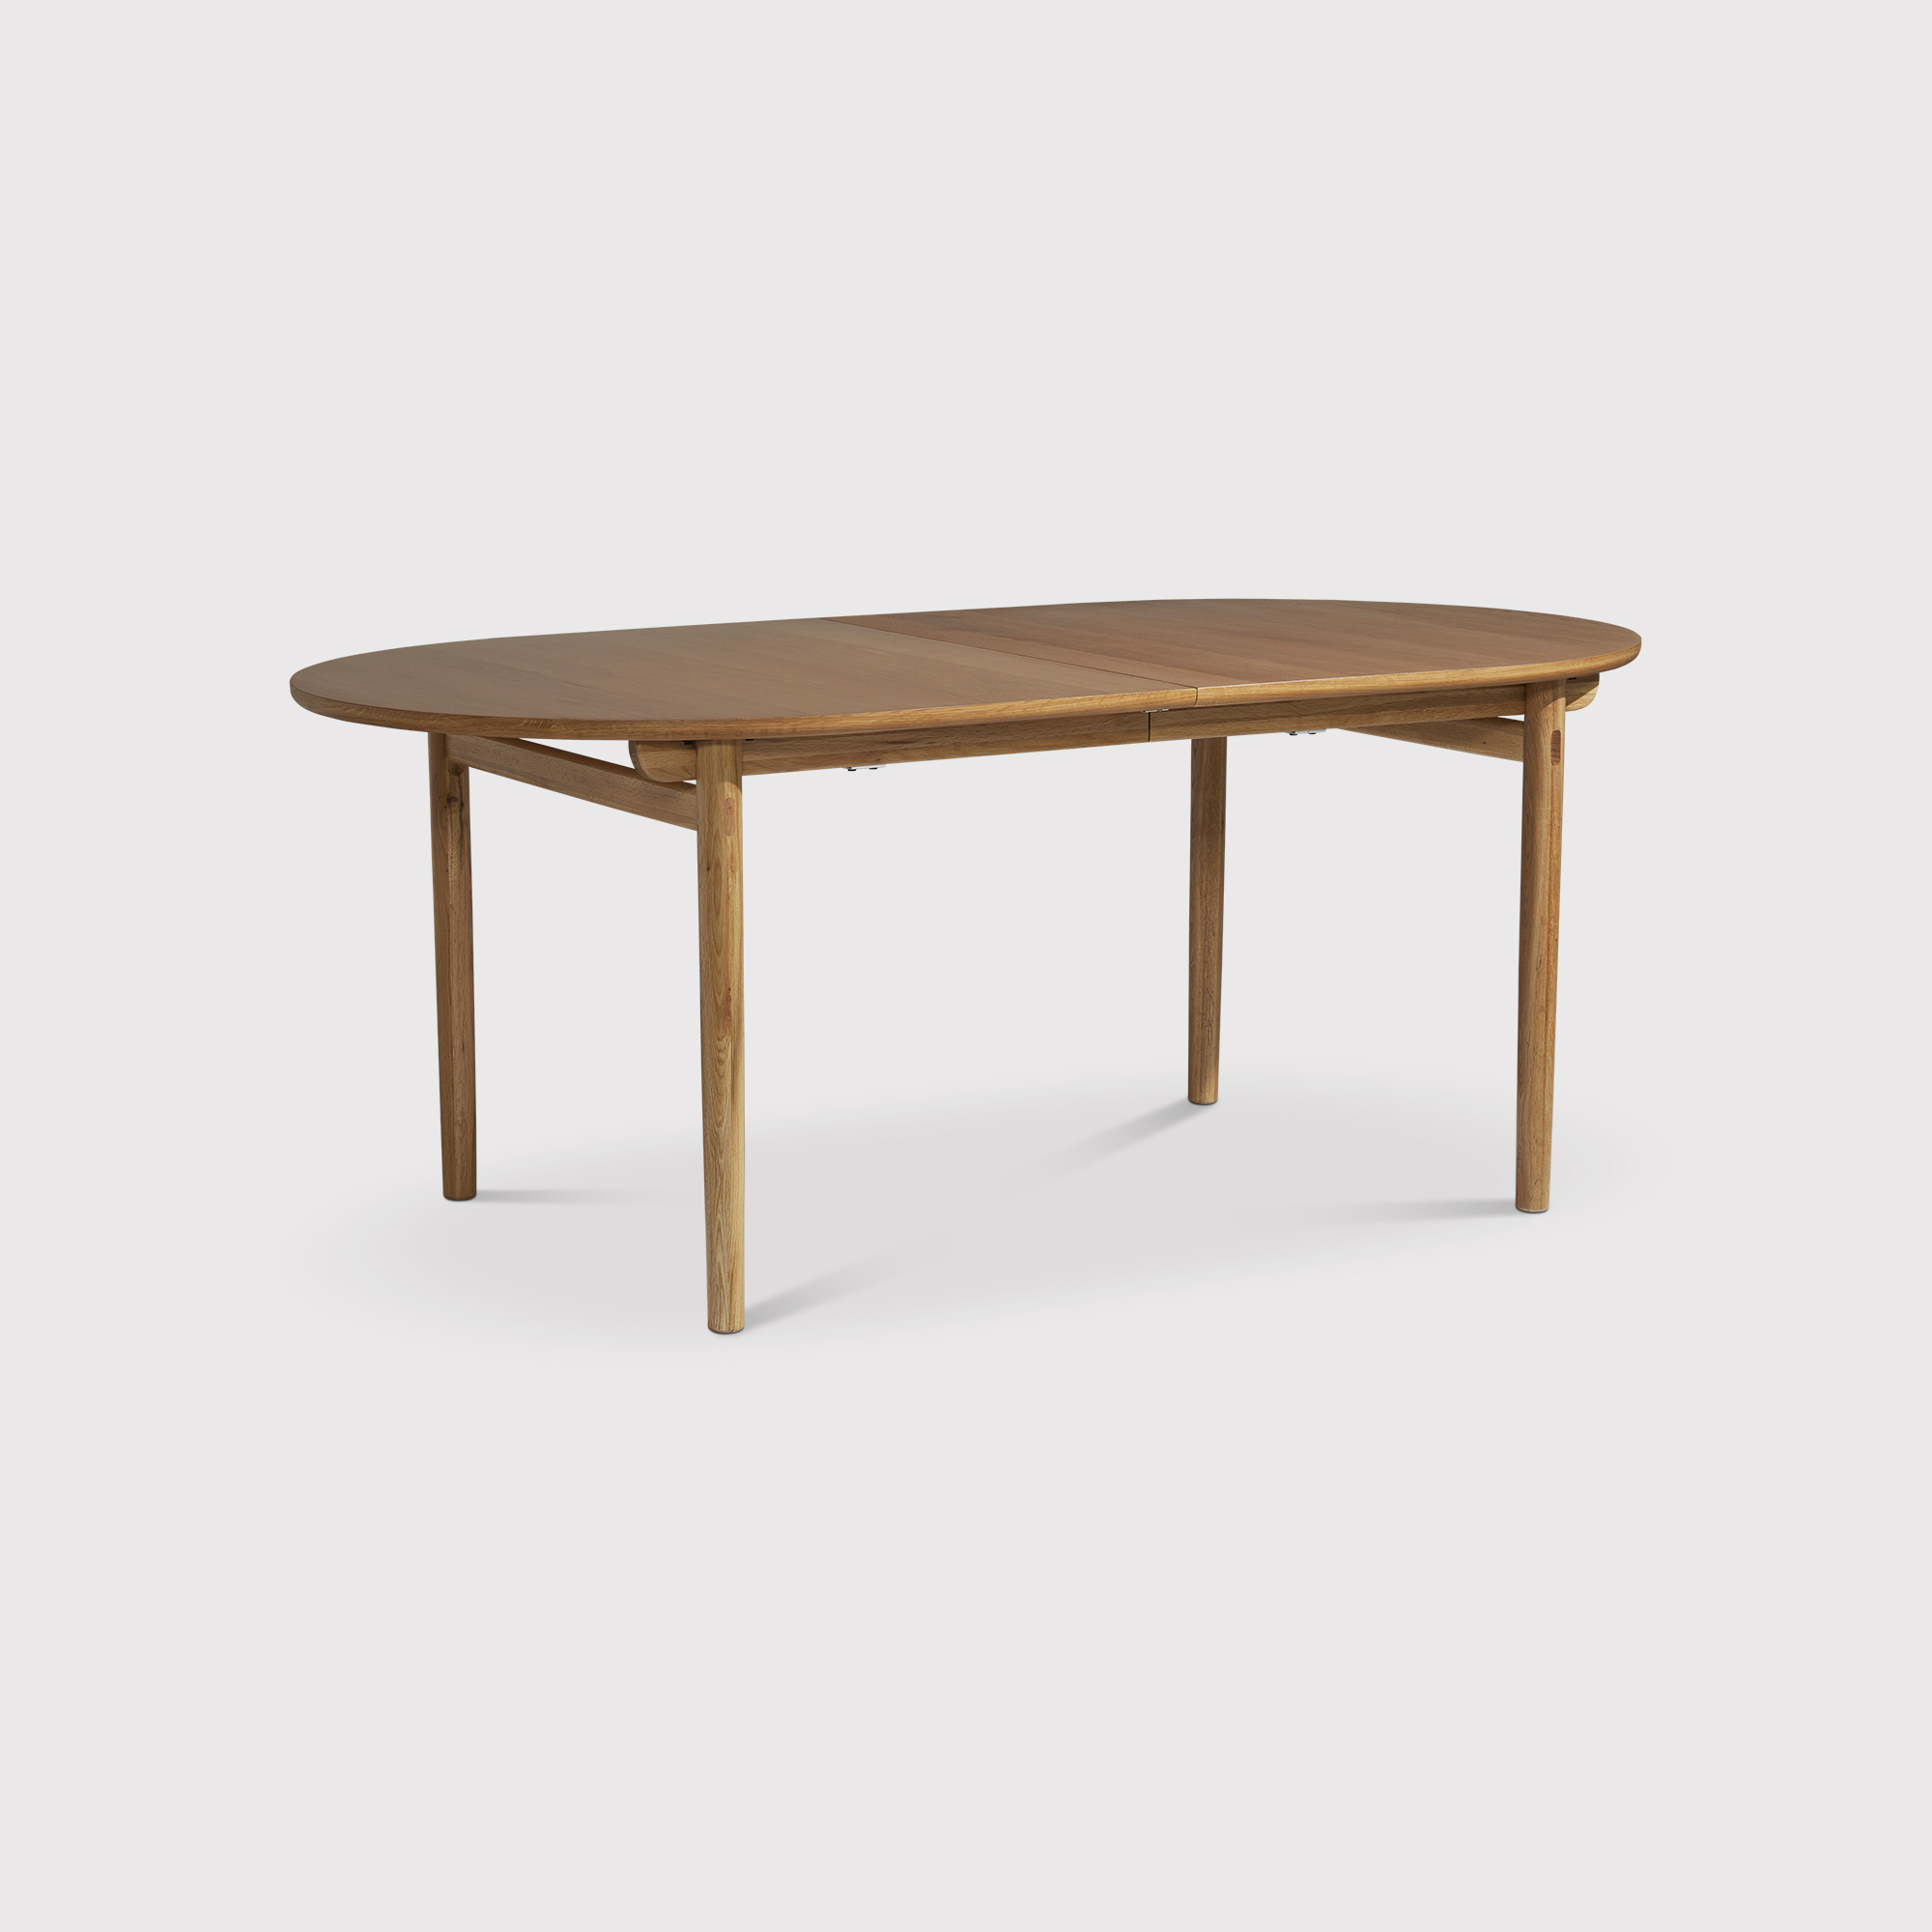 Woodrow Extending Dining Table 190x100cm With Leaf, Neutral | Barker & Stonehouse